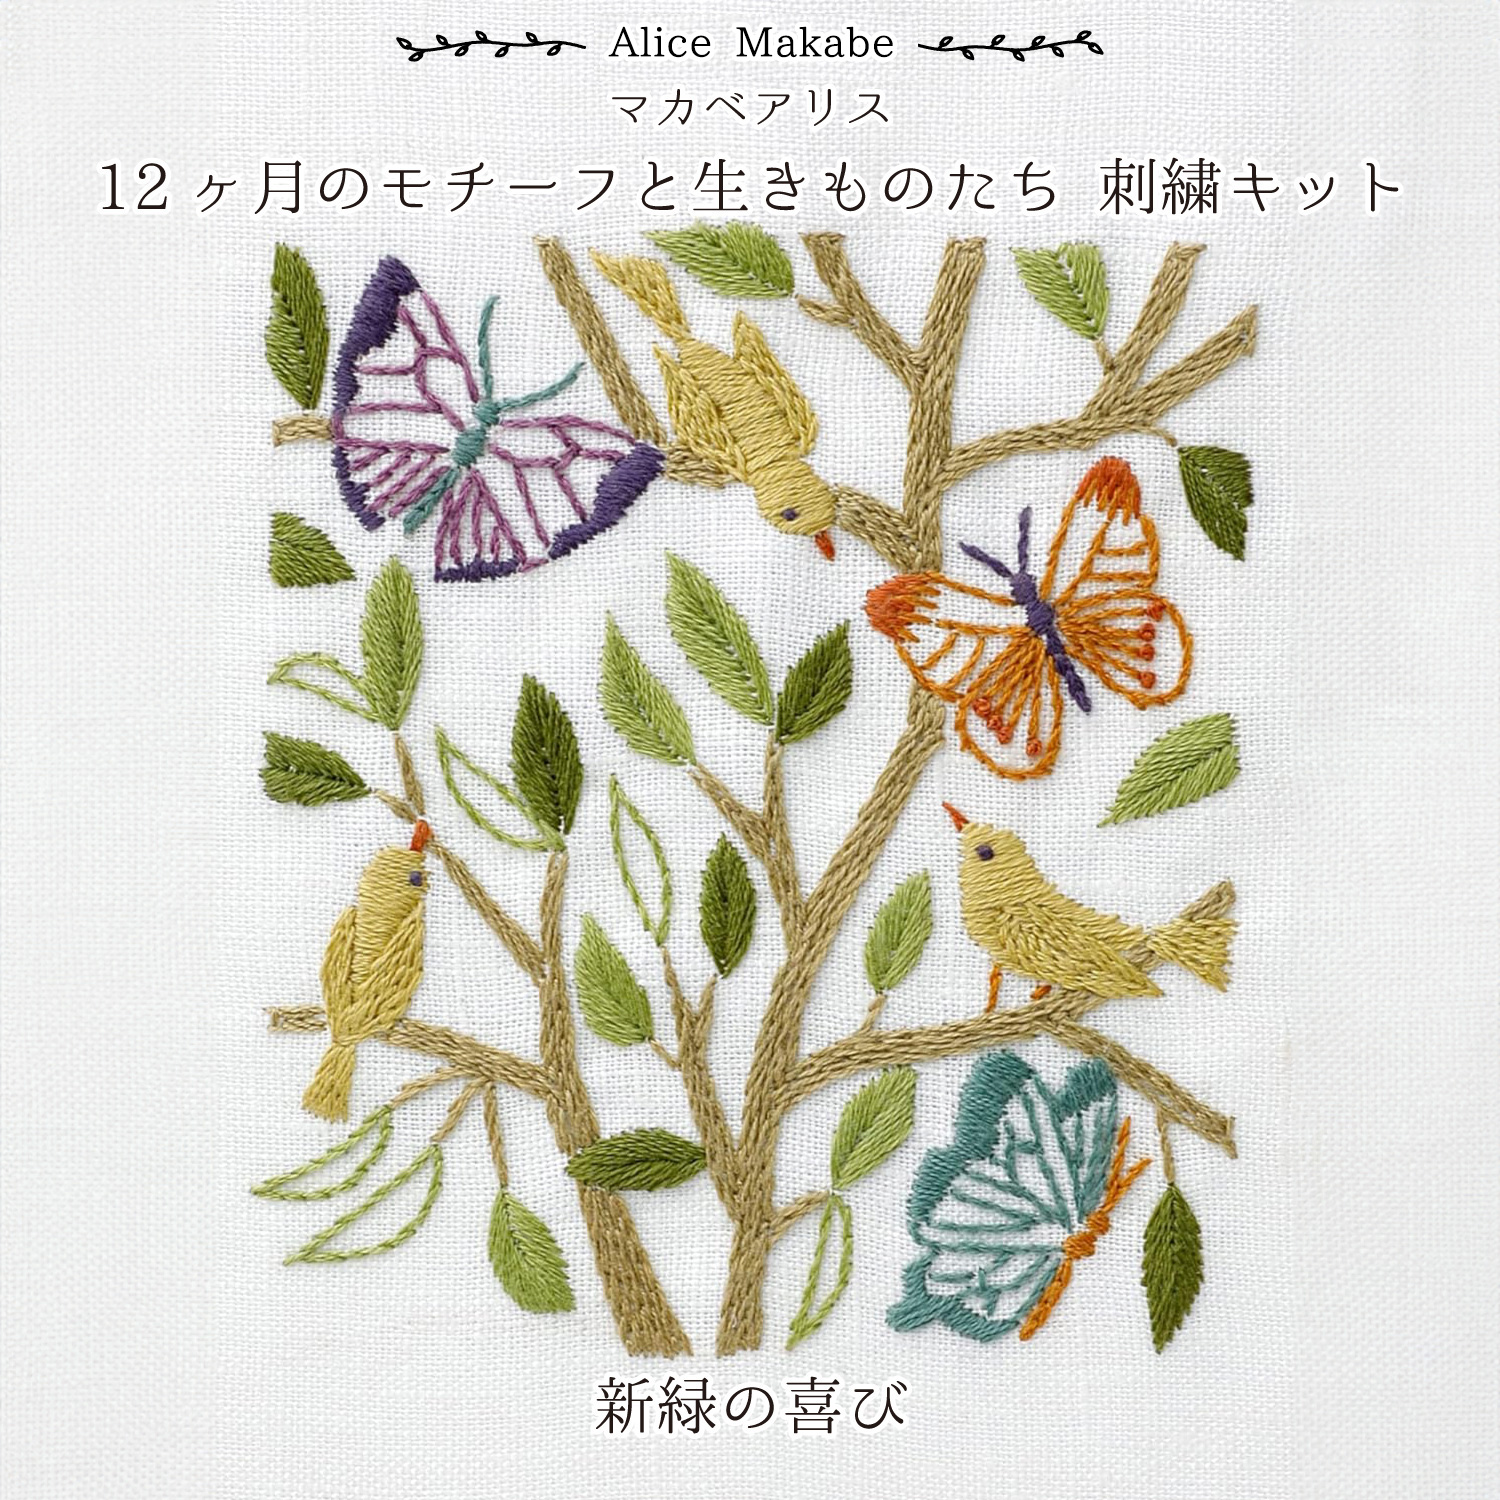 DMC-JPT55 Embroidery kit, Alice Makabe, 12 months motif and creatures (bag)